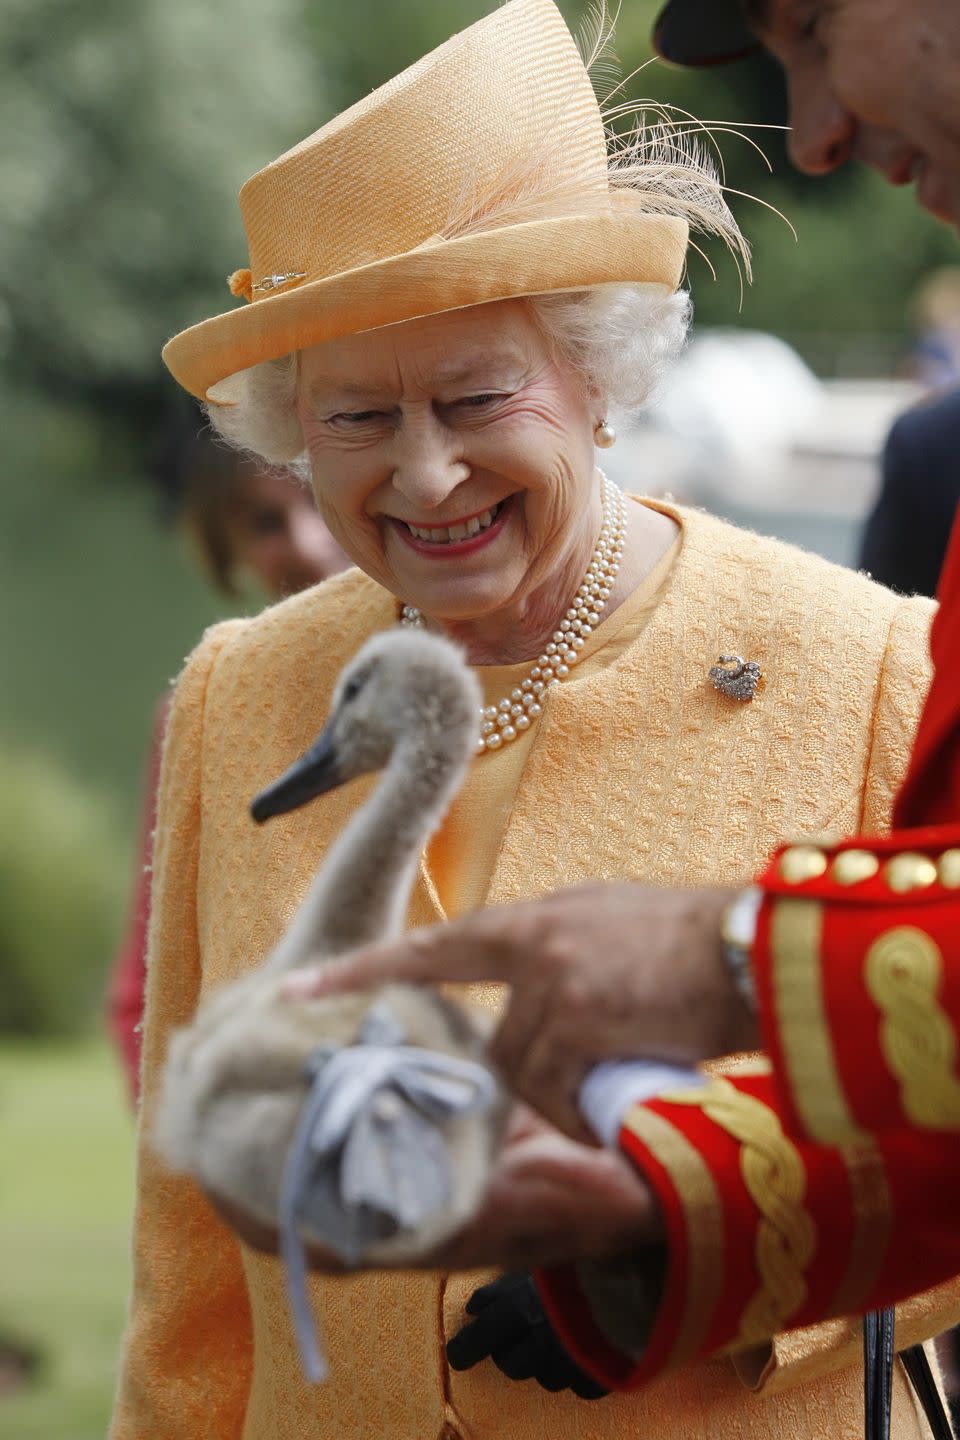 In 2005, the Queen claimed ownership of 88 cygnets, or young swans, on the River Thames. The swans are now looked over by a royal swan keeper.